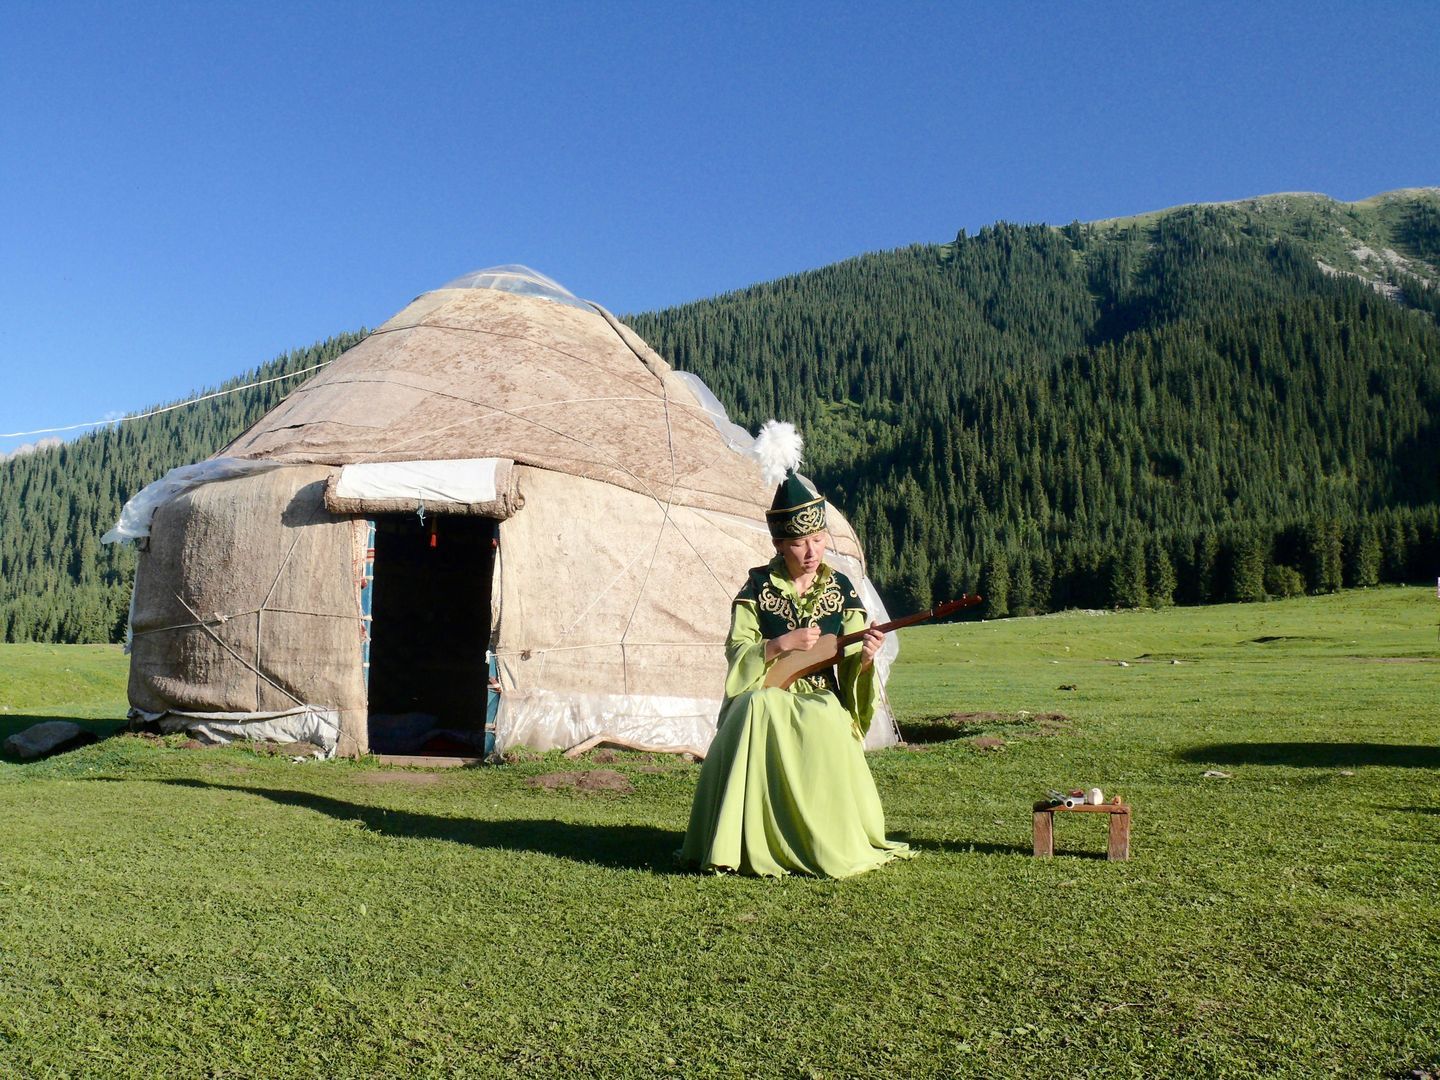 kyrgyz girl singing in fornt of the yurt